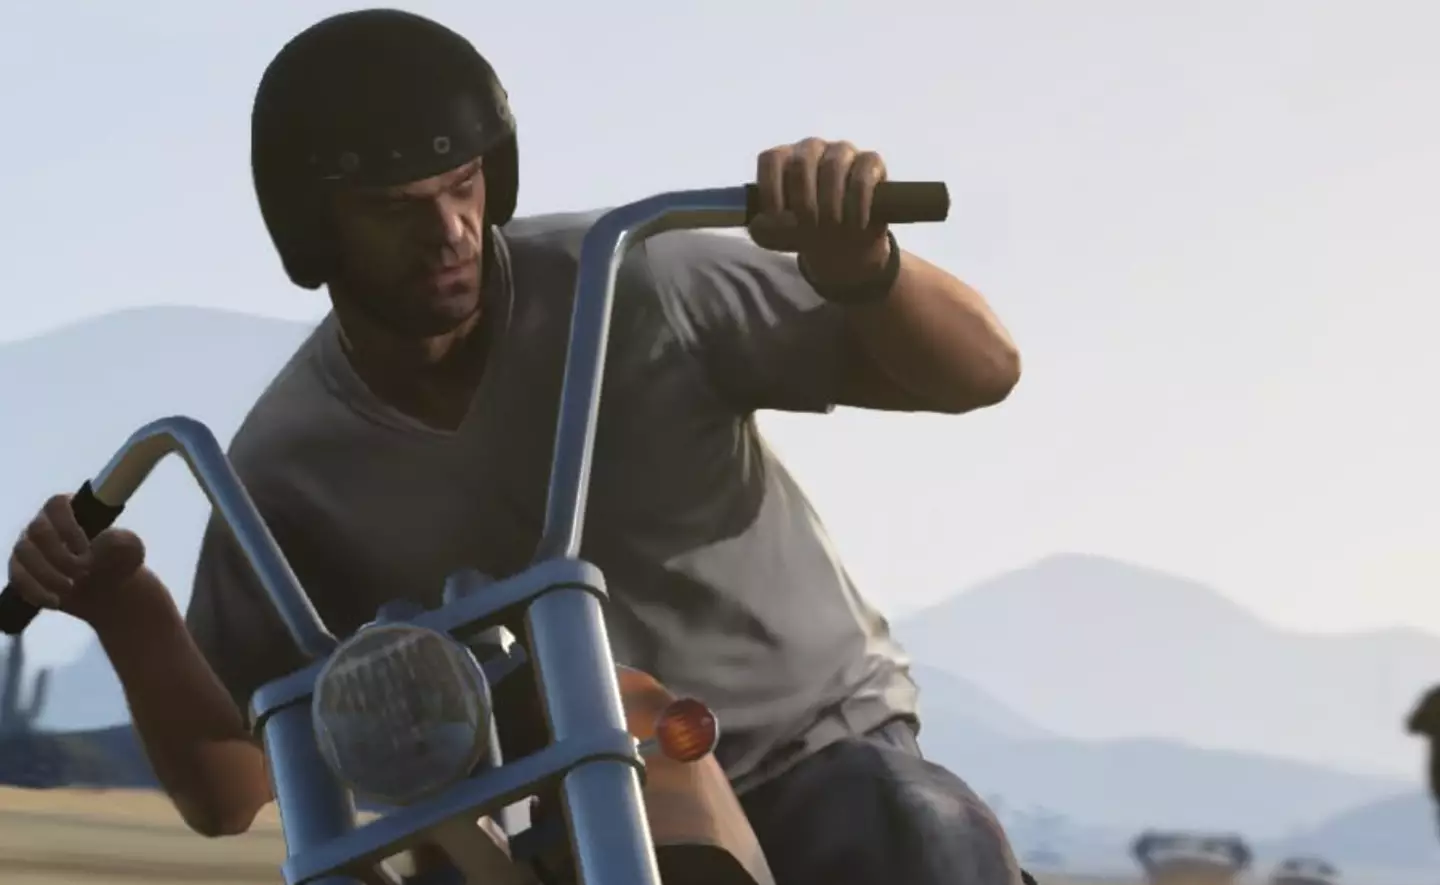 An 18-year-old is on trial for allegedly hacking and blackmailing Rockstar Games.